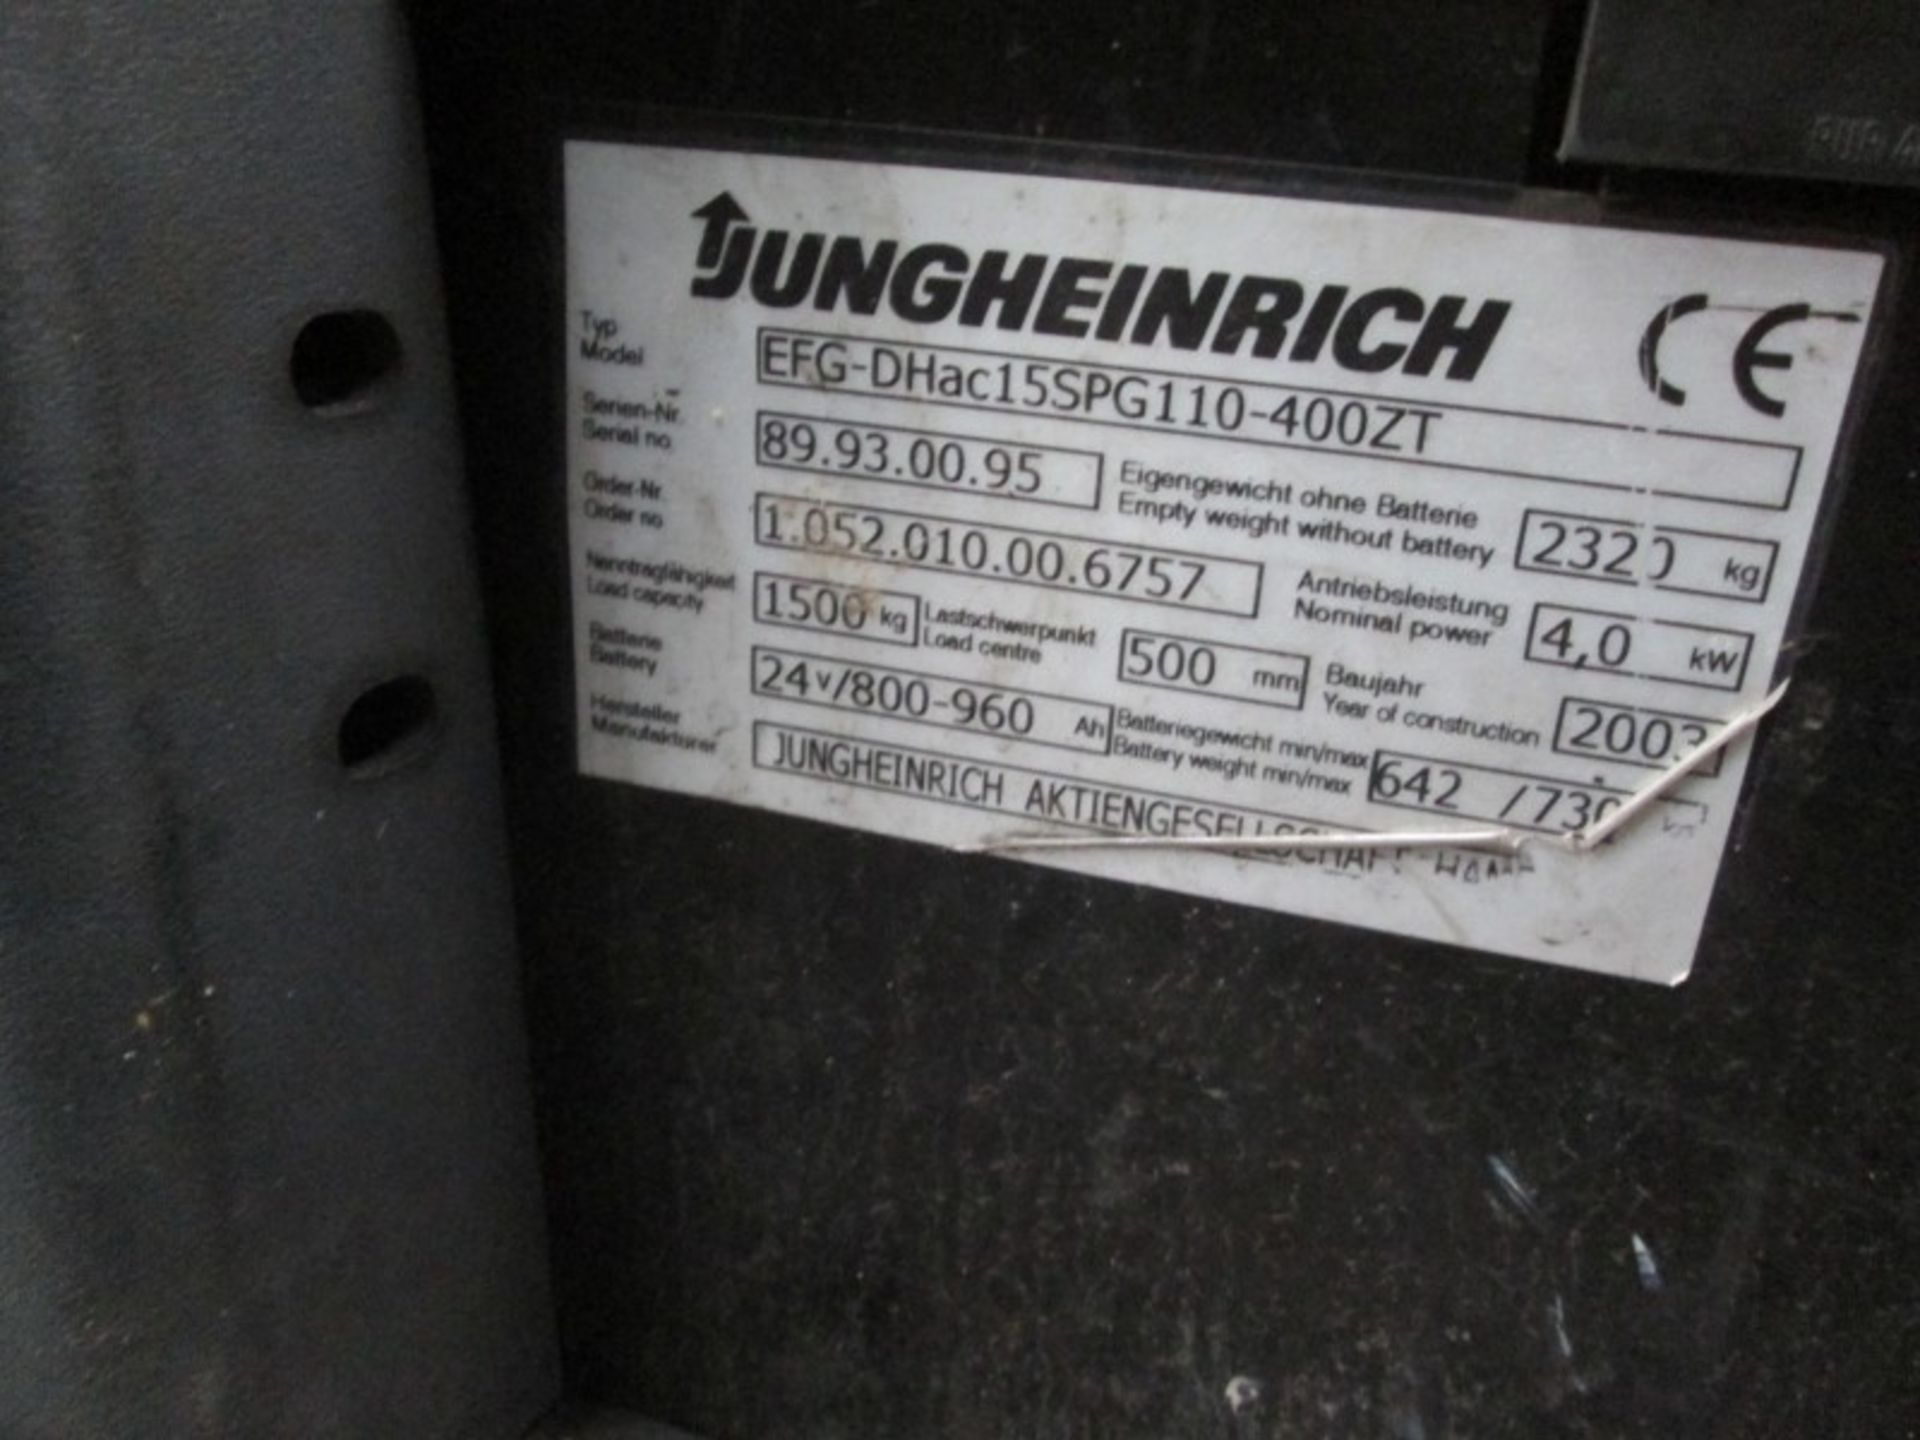 JUNGHEINRICH EFGDHAC15SPG110-400ZT Plant Electric - VIN: 89930095 - Year: 2003 - 5,121 Hours - - Image 9 of 9